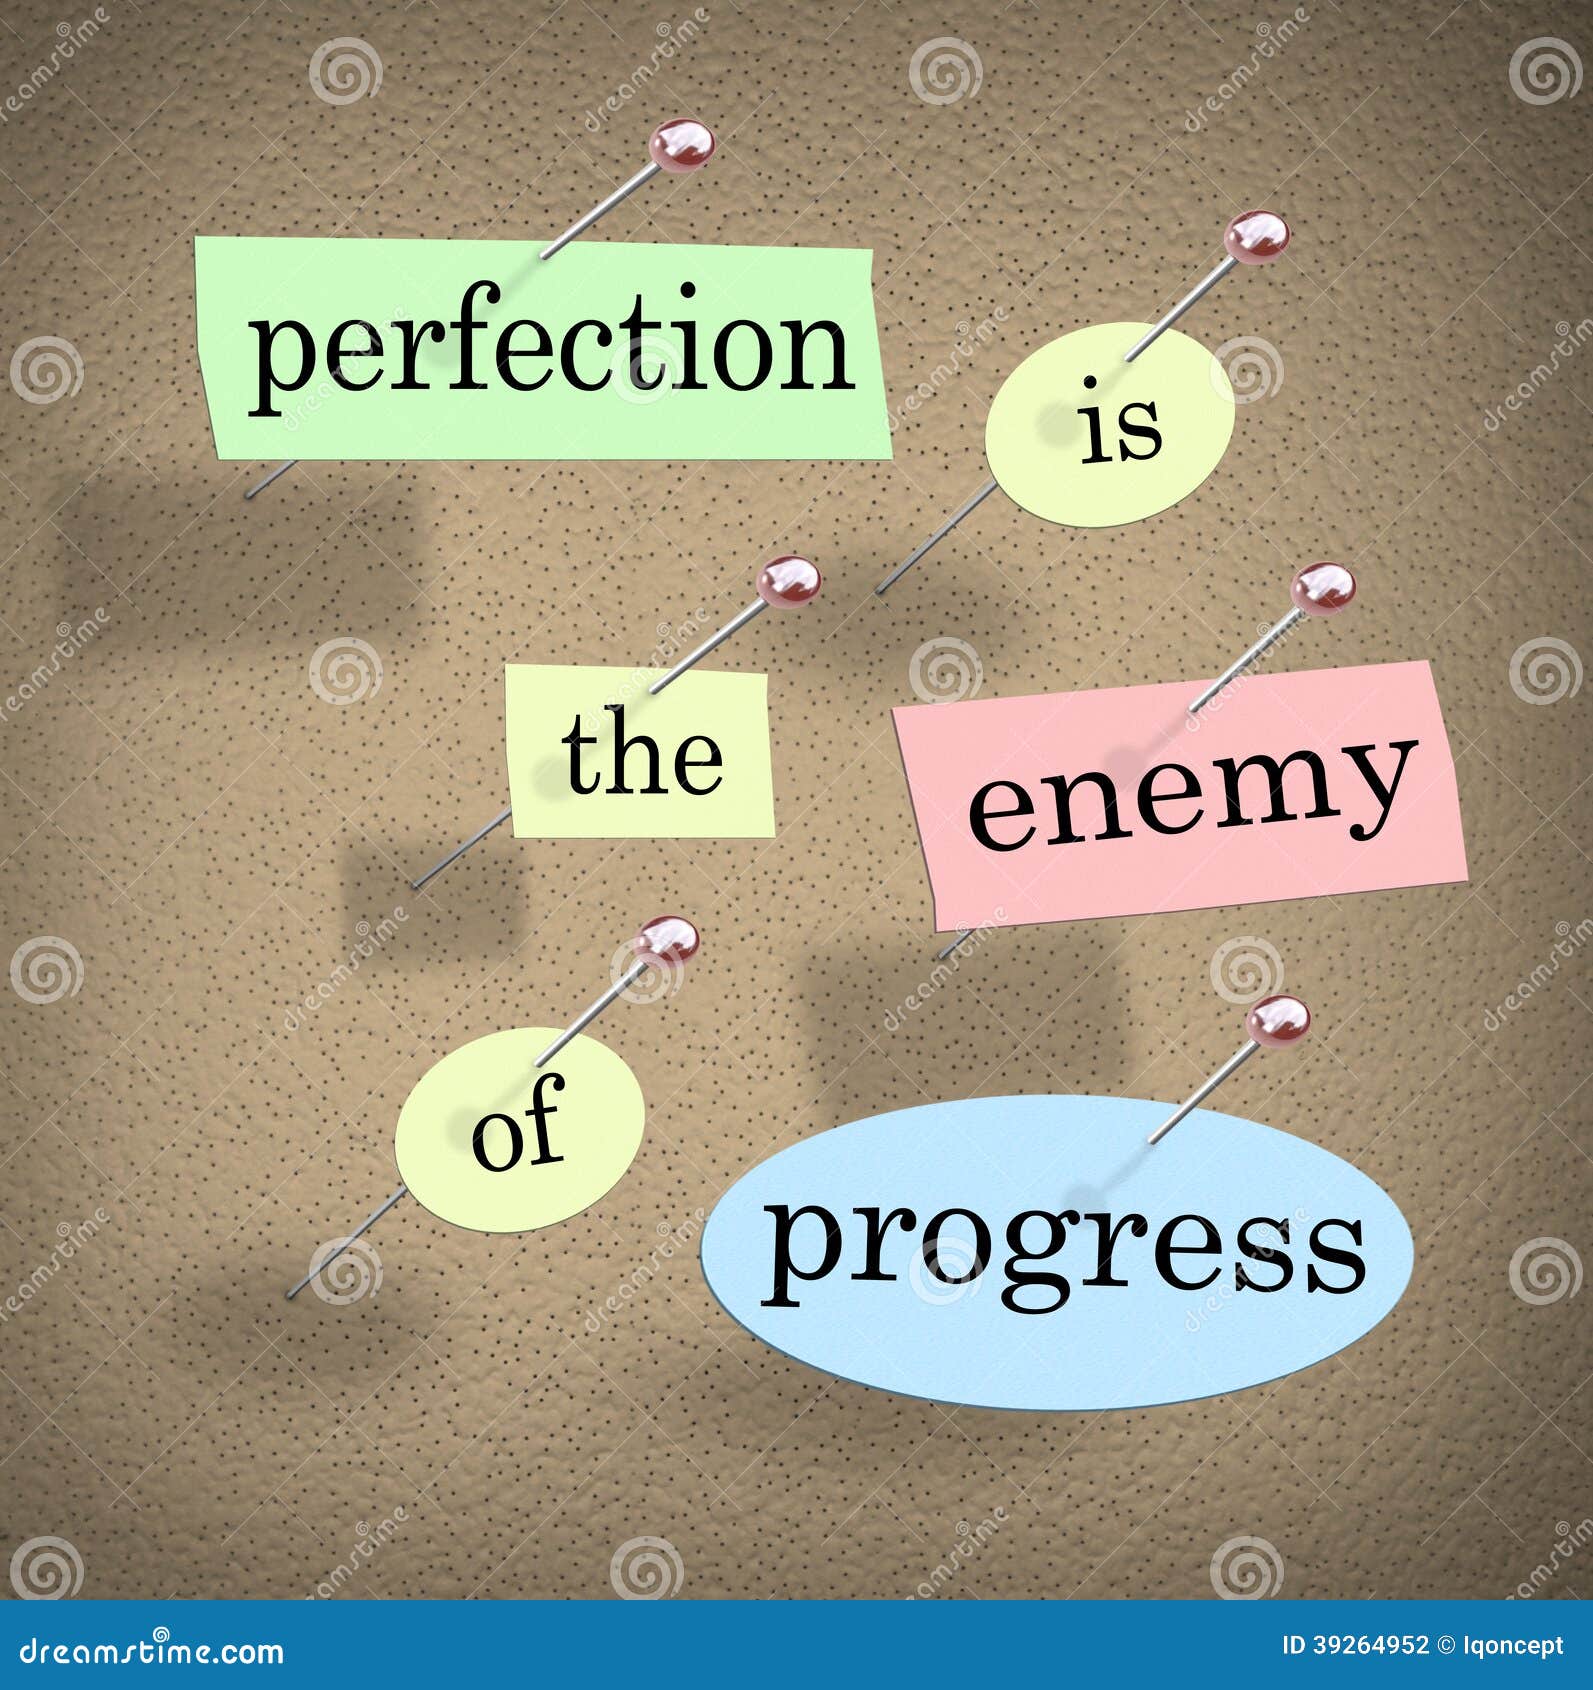 perfection is the enemy of progress saying quote bulletin board